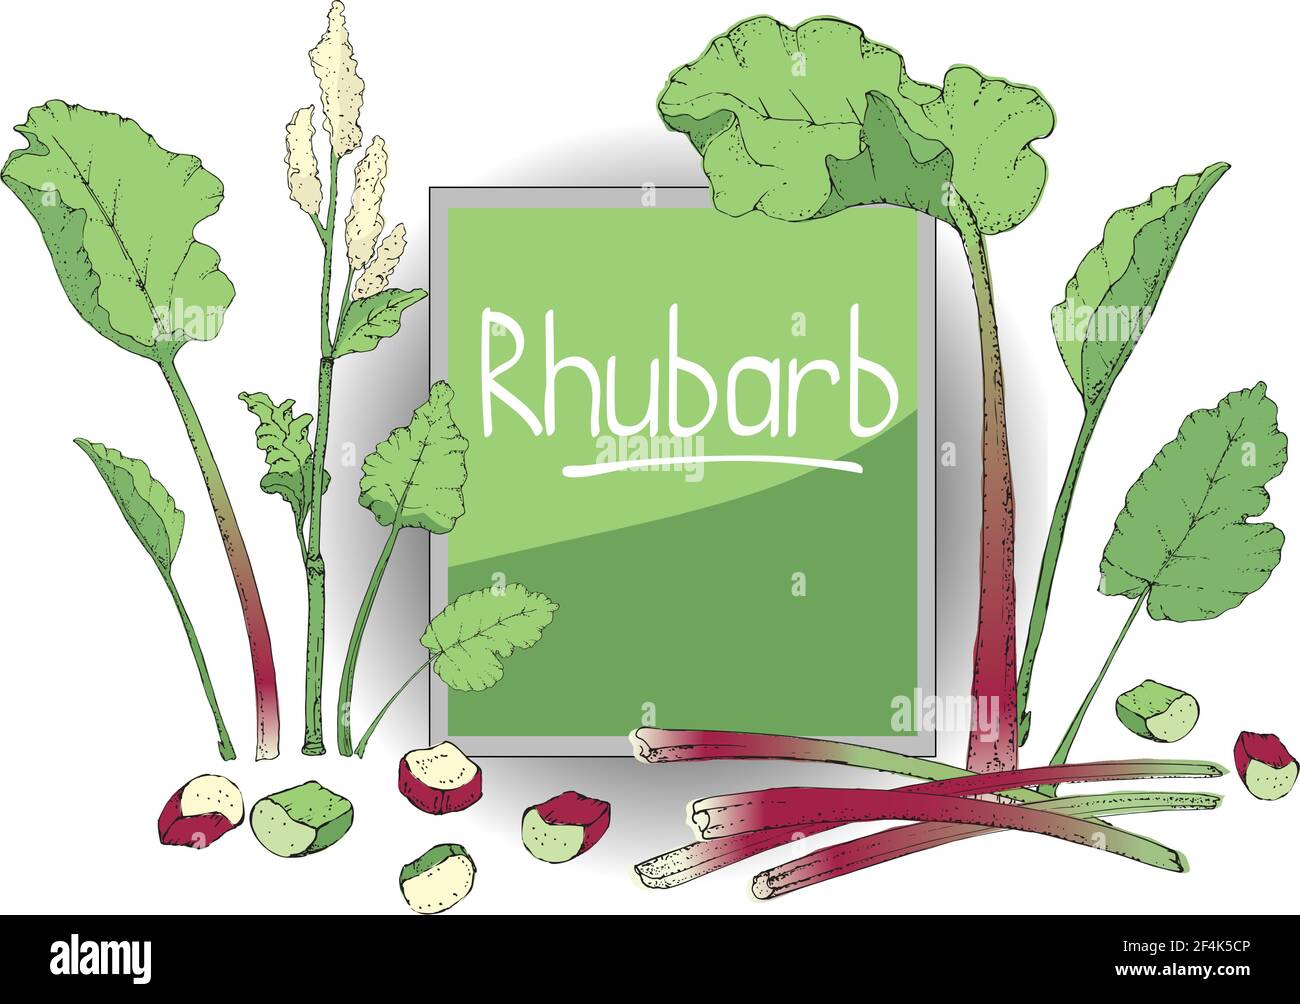 Vegetable vector set with rhubarb. Fresh pieplant with green leaves, green and red stems, white and pale yellow flowers, whole and cut into pieces. Stock Vector